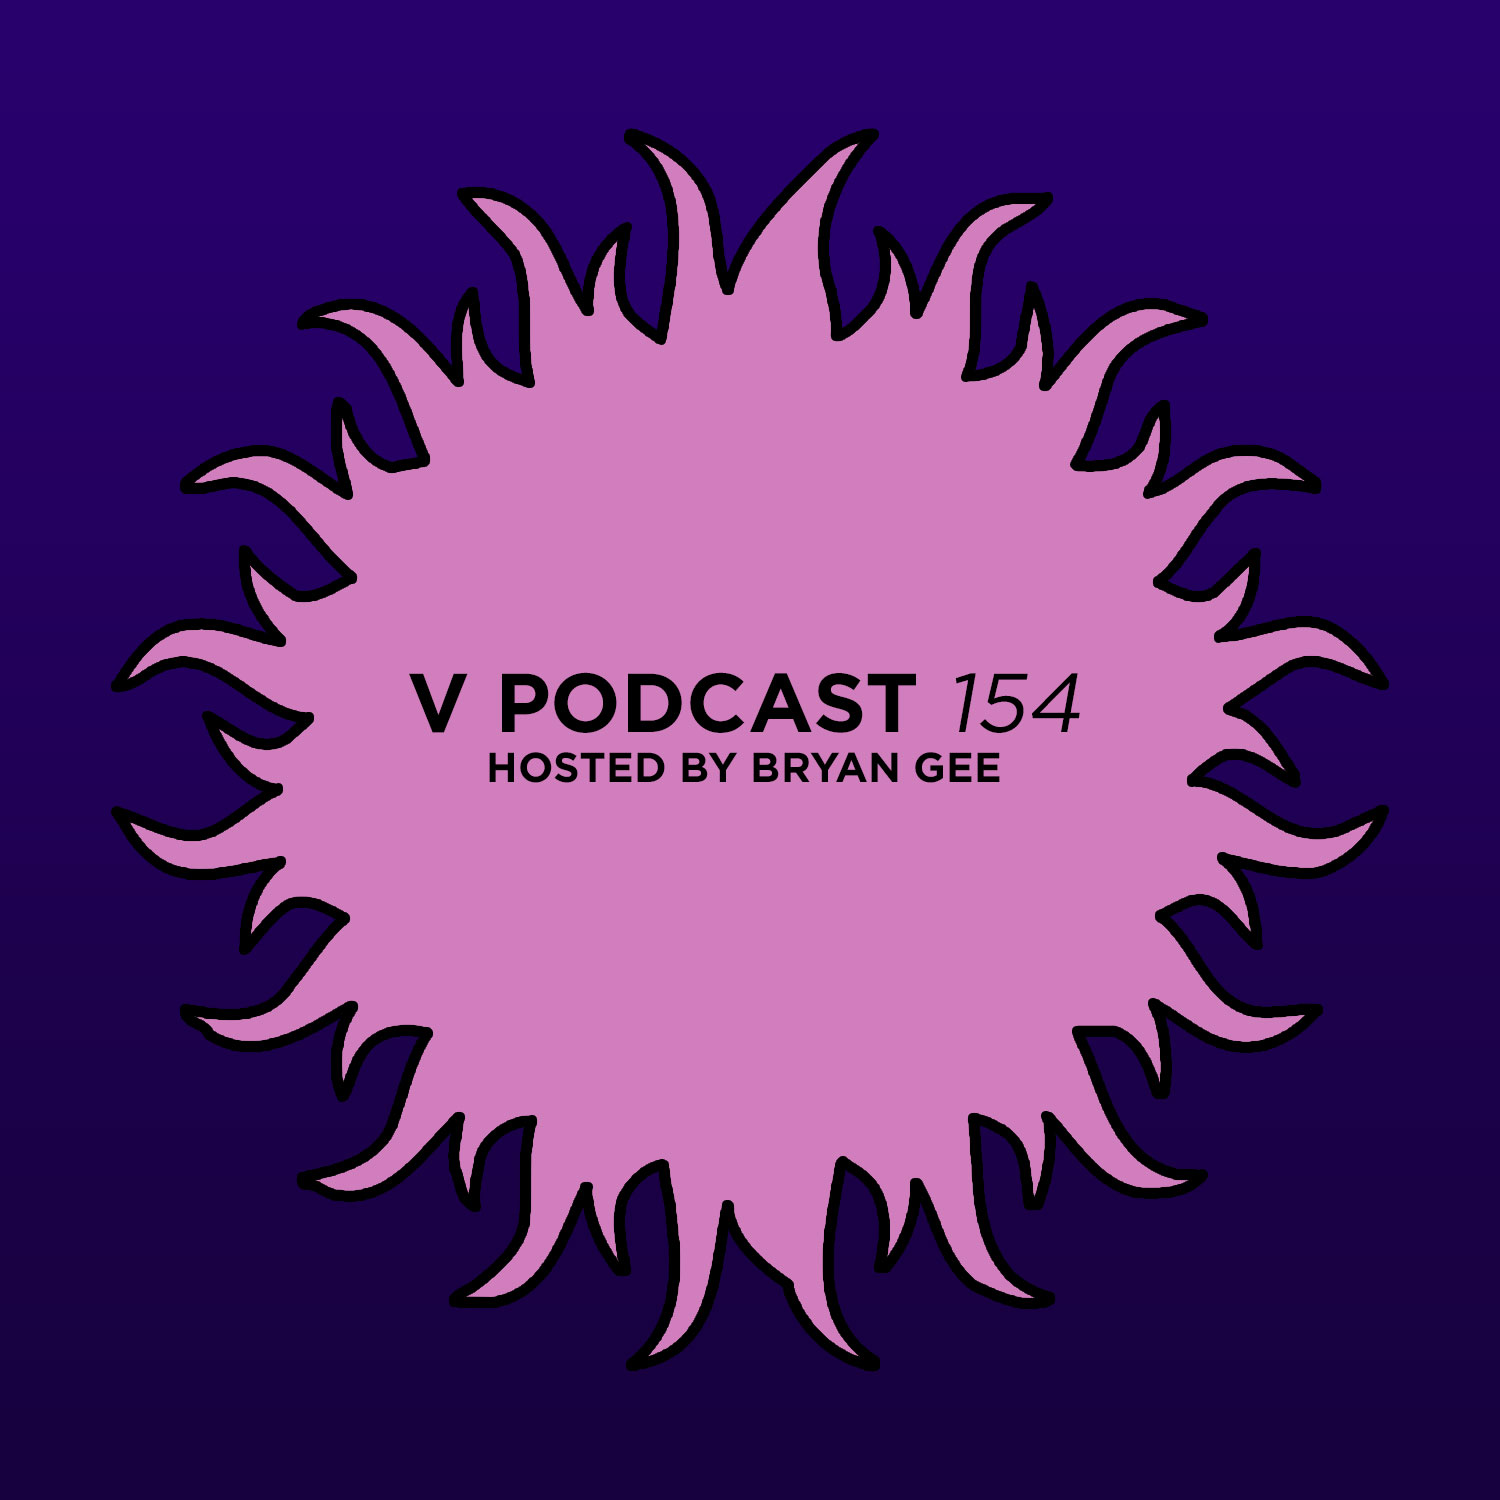 V Podcast 154 - Hosted by Bryan Gee w. Sl8r Guest Mix cover art